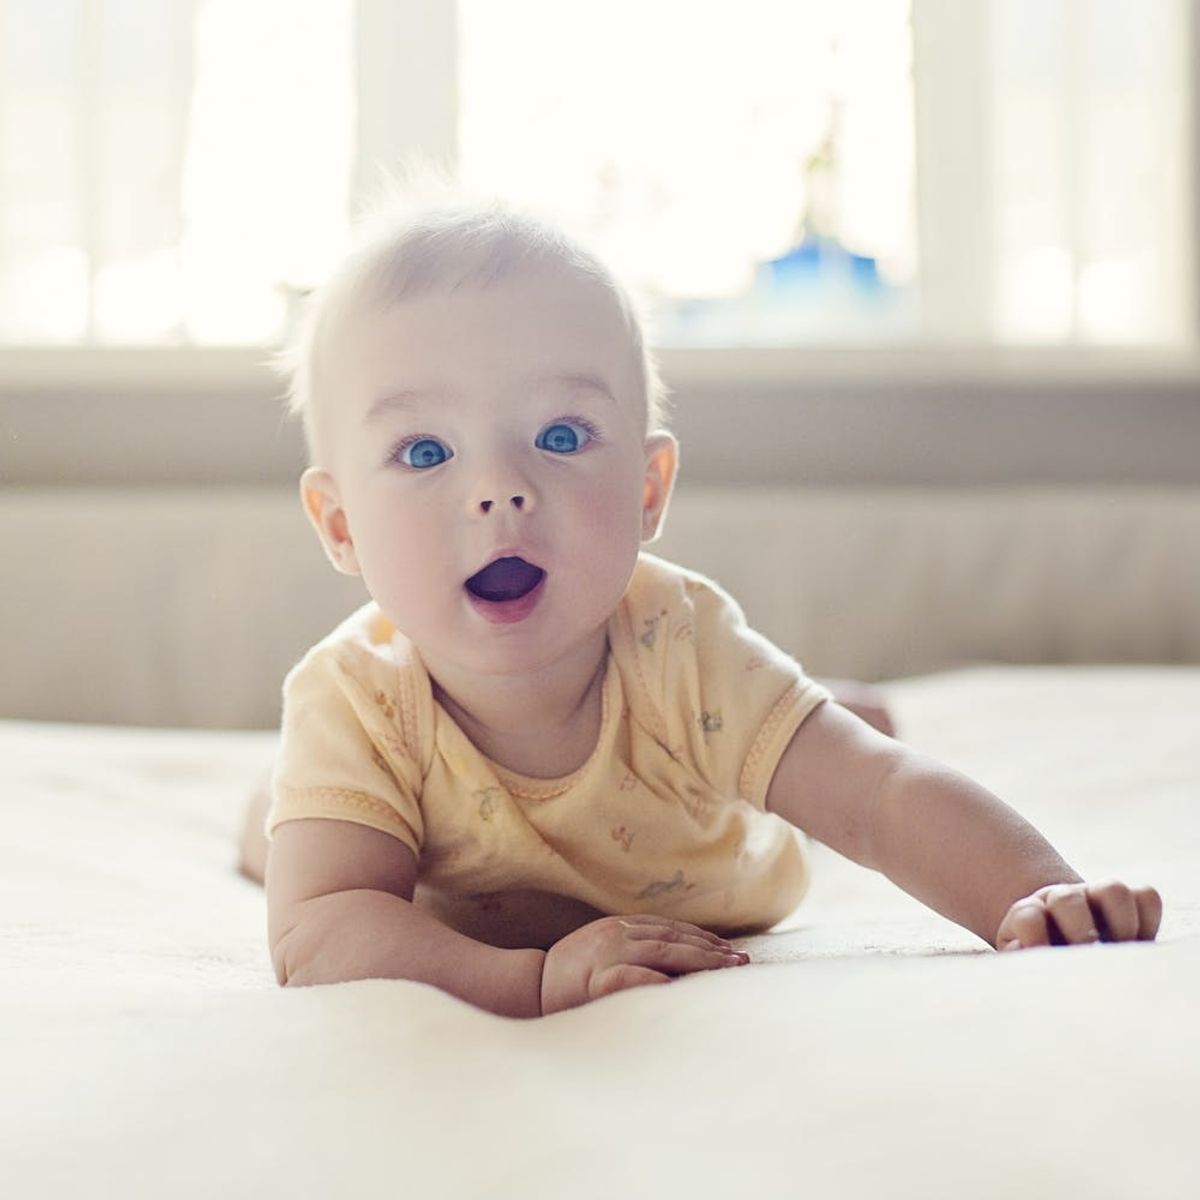 The Most Popular US Baby Names in 2016 Were Surprisingly Unsurprising